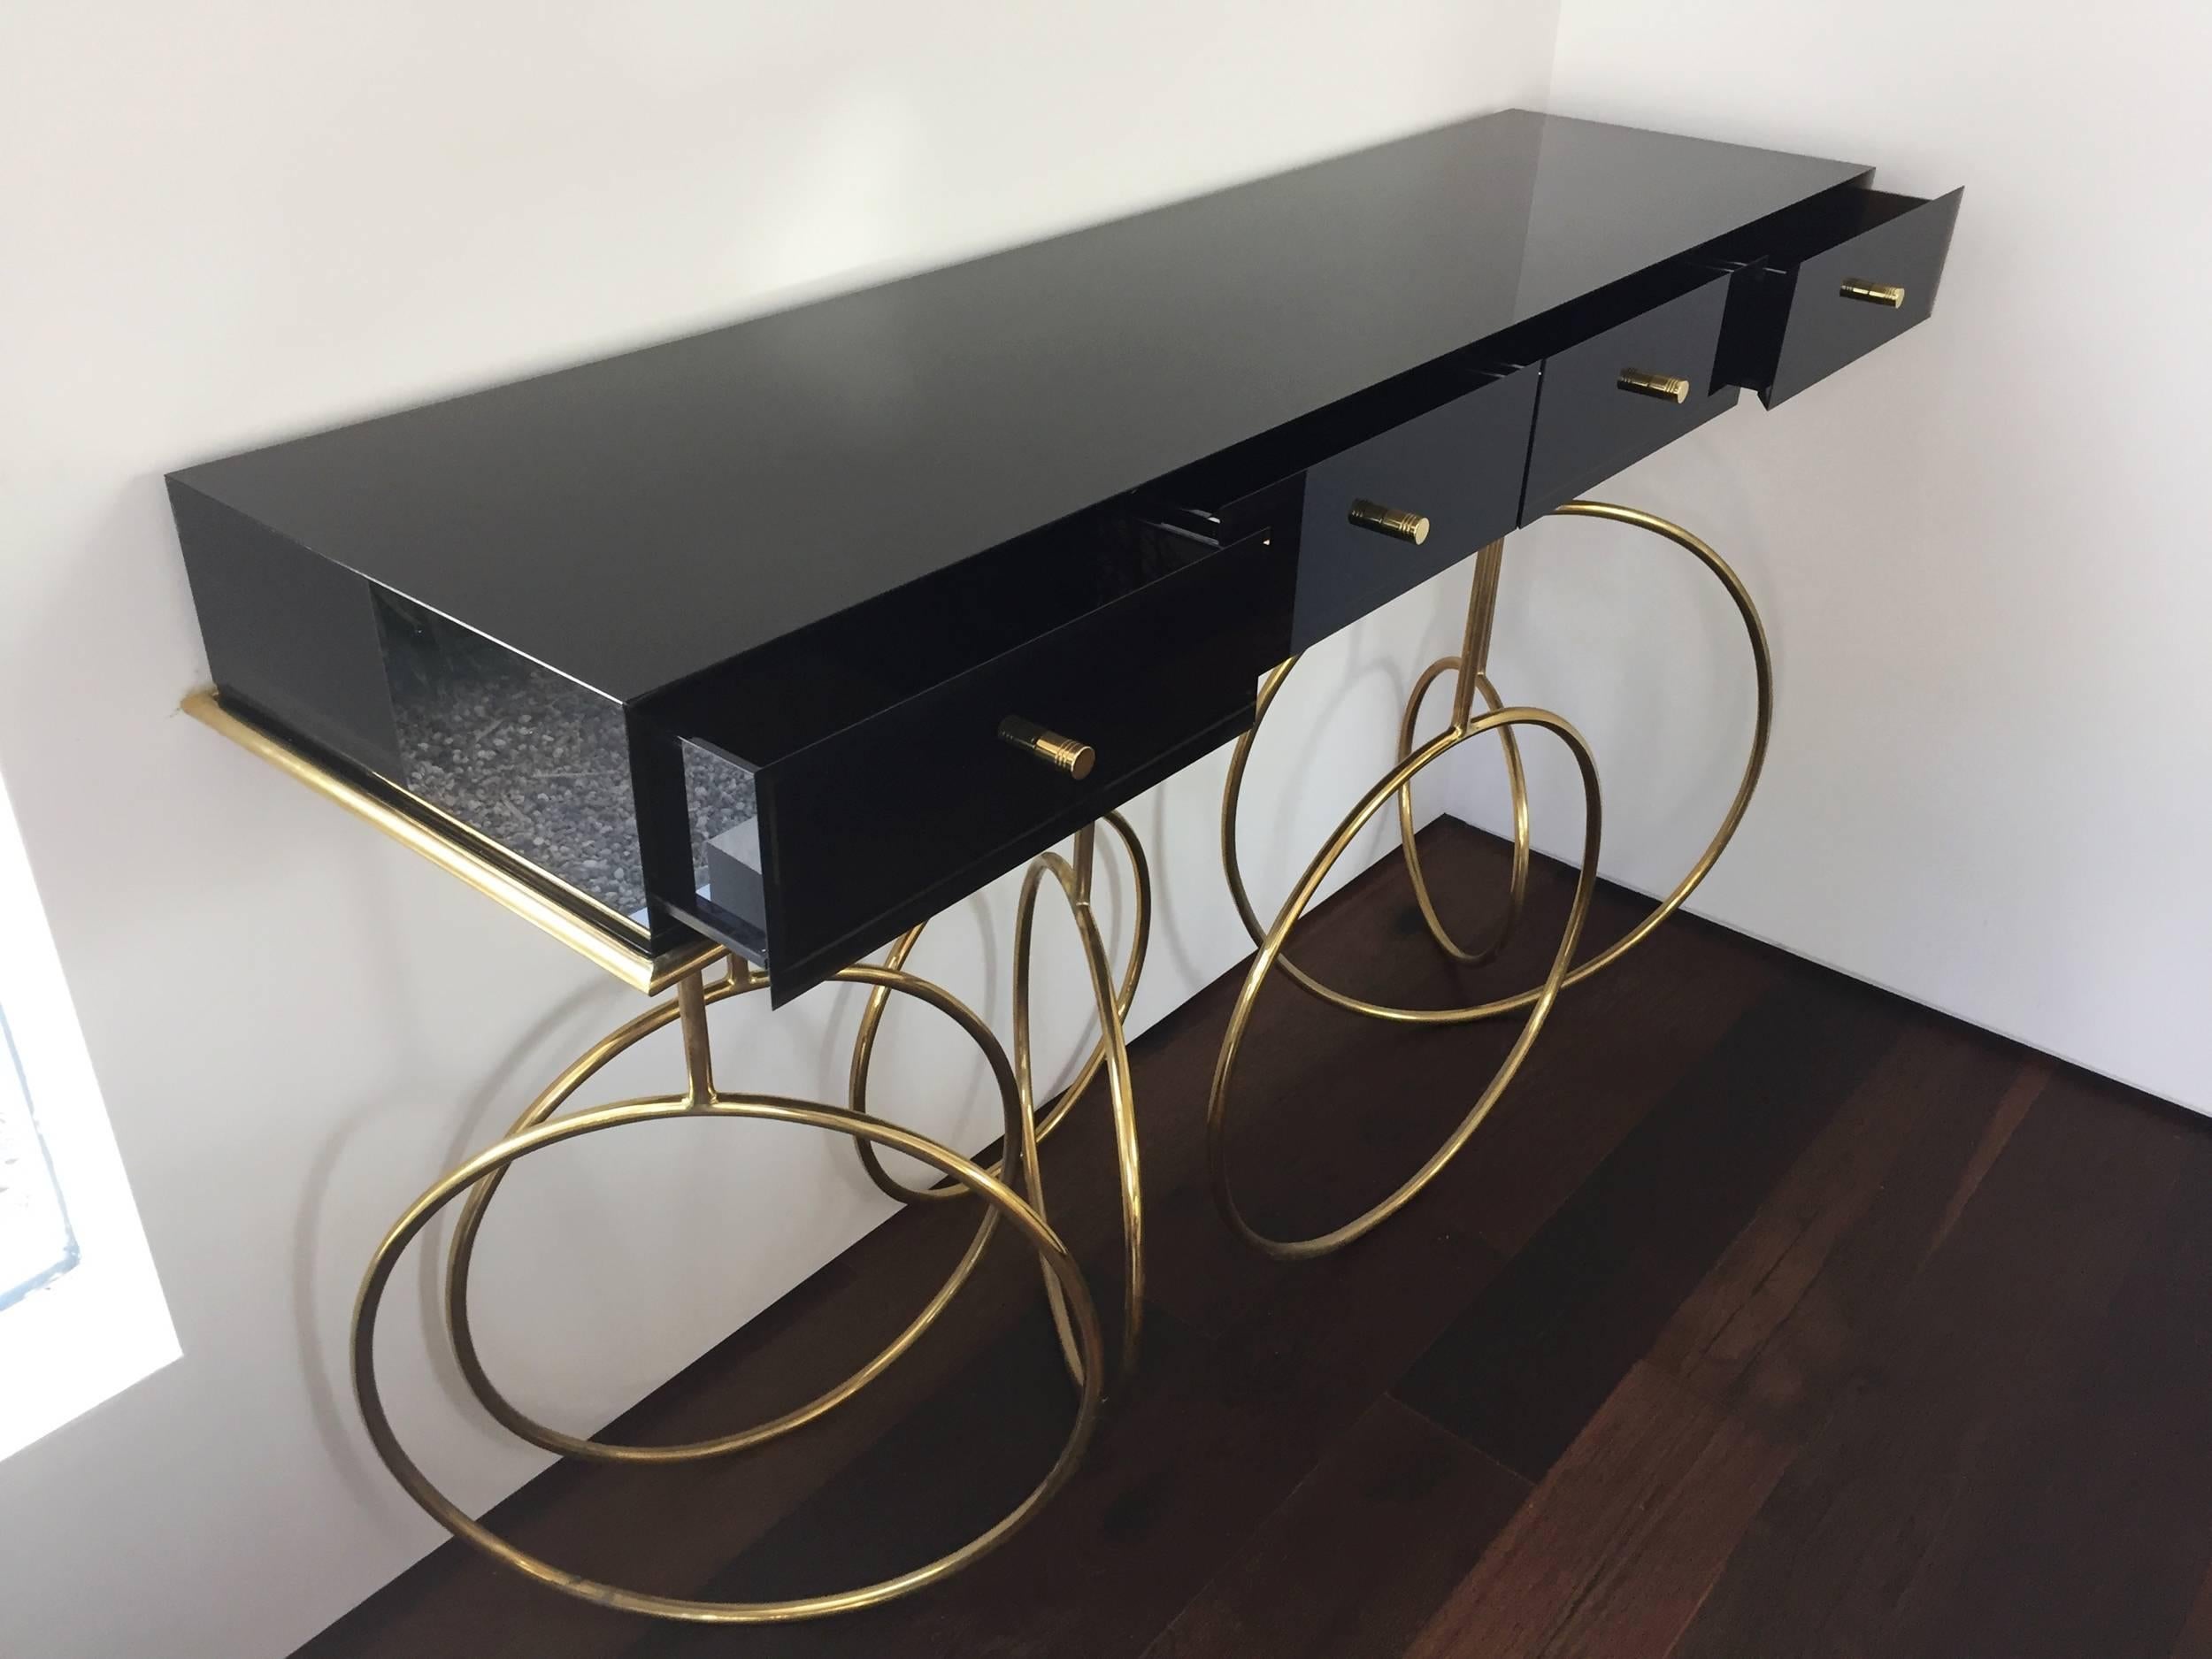 Stunning console table designed by Amparo Calderon Tapia for Cain Modern.
The table is executed in bronzed Lucite and solid brass base, having four drawers making it ideal to use as a console table or even a desk.

The brass base needs to be